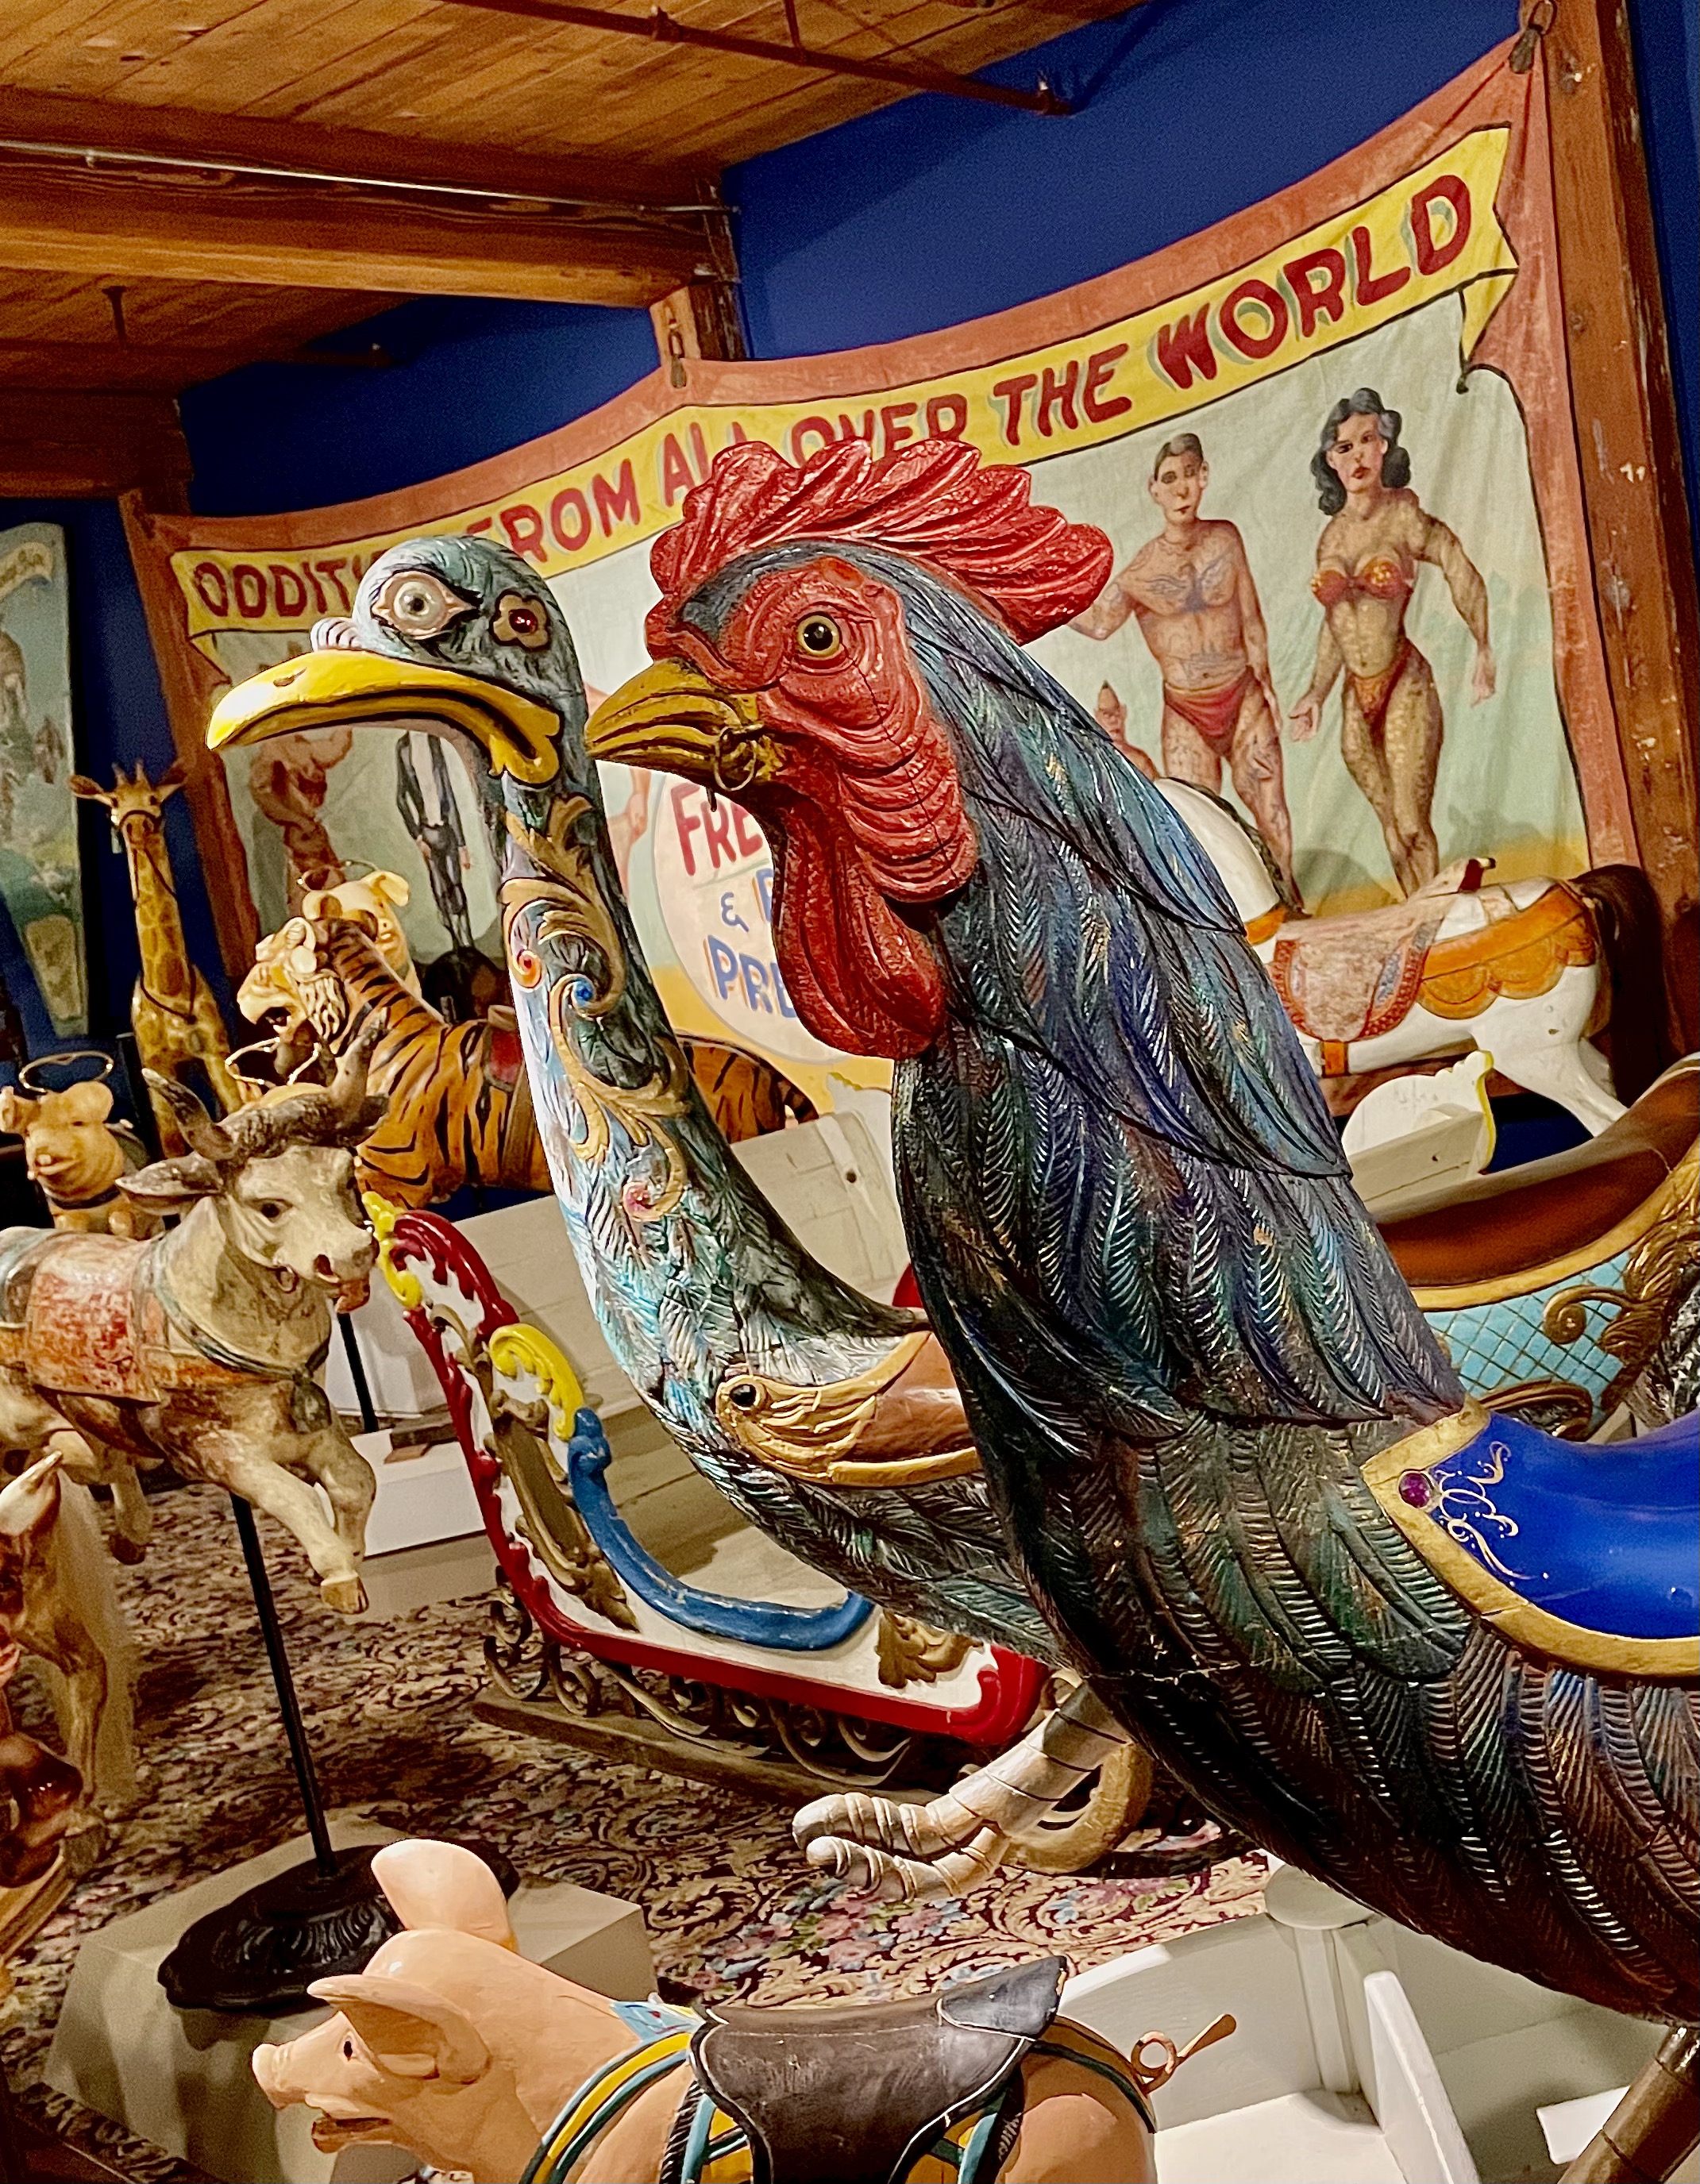 A variety of carousel animals on display at the museum